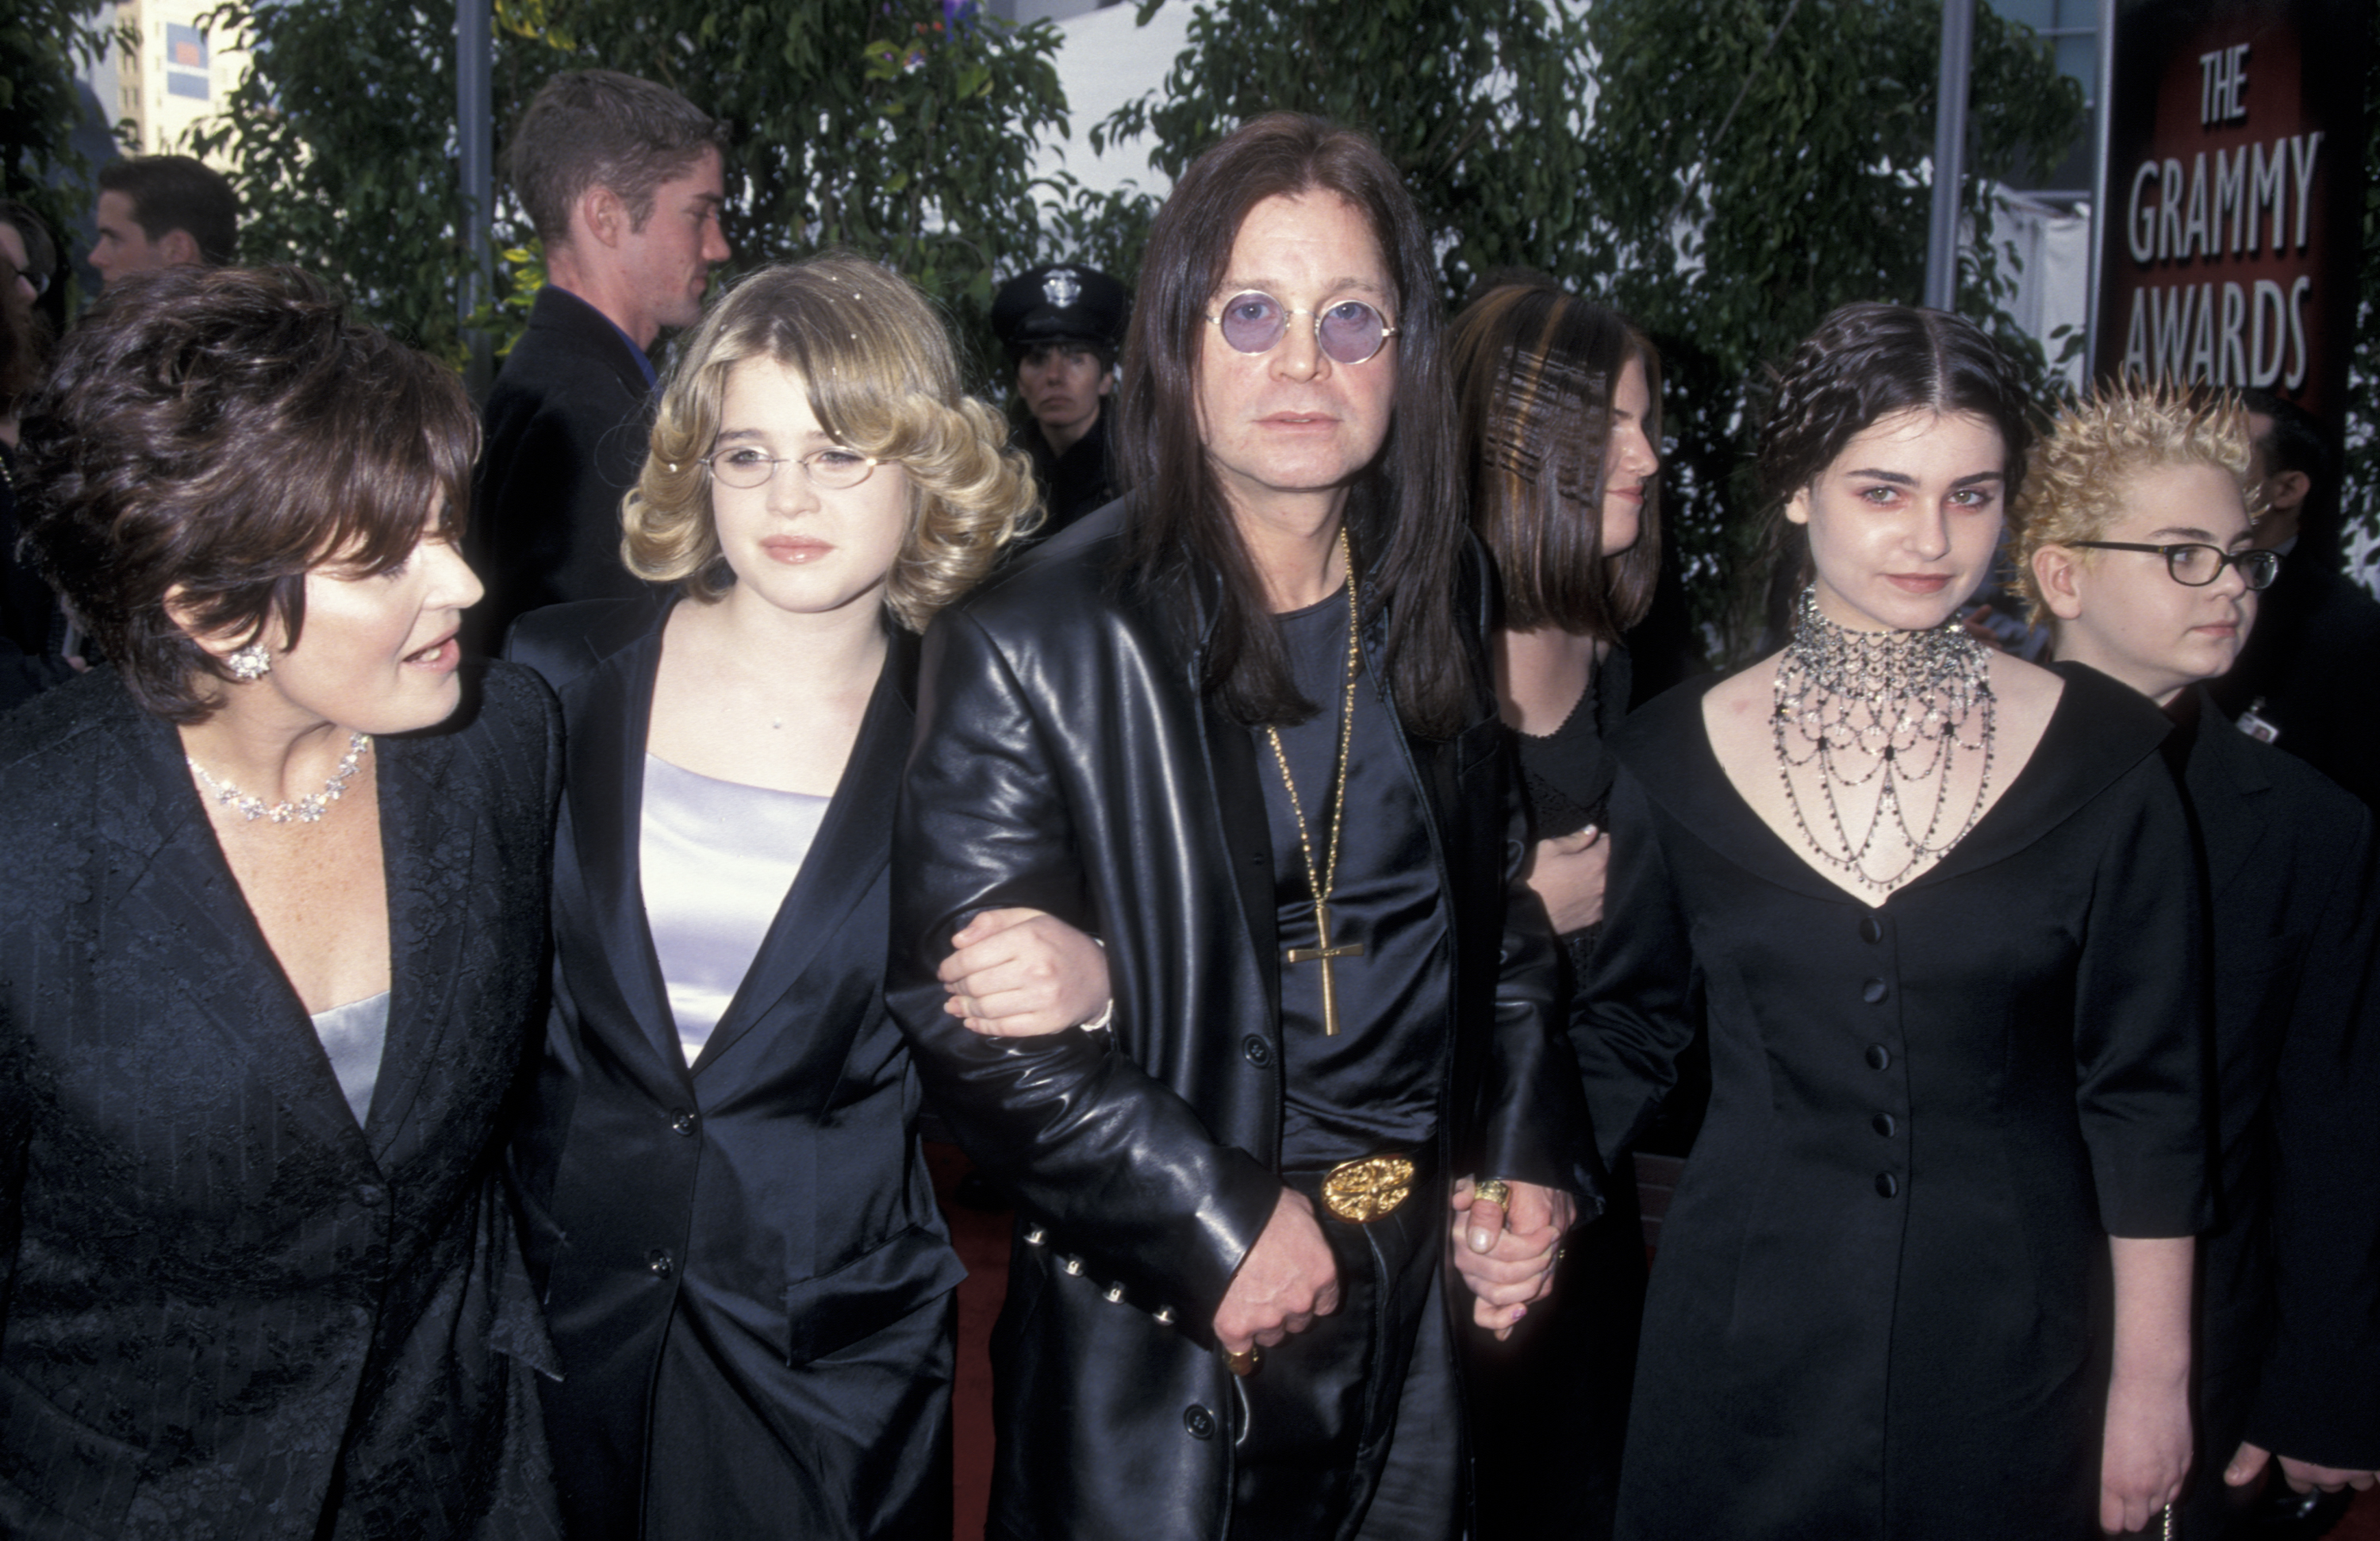 Sharon, Kelly, Ozzy, Aimee, and Jack Osbourne at the 42nd Annual Grammy Awards on February 23, 2000 in Los Angeles, California | Source: Getty Images